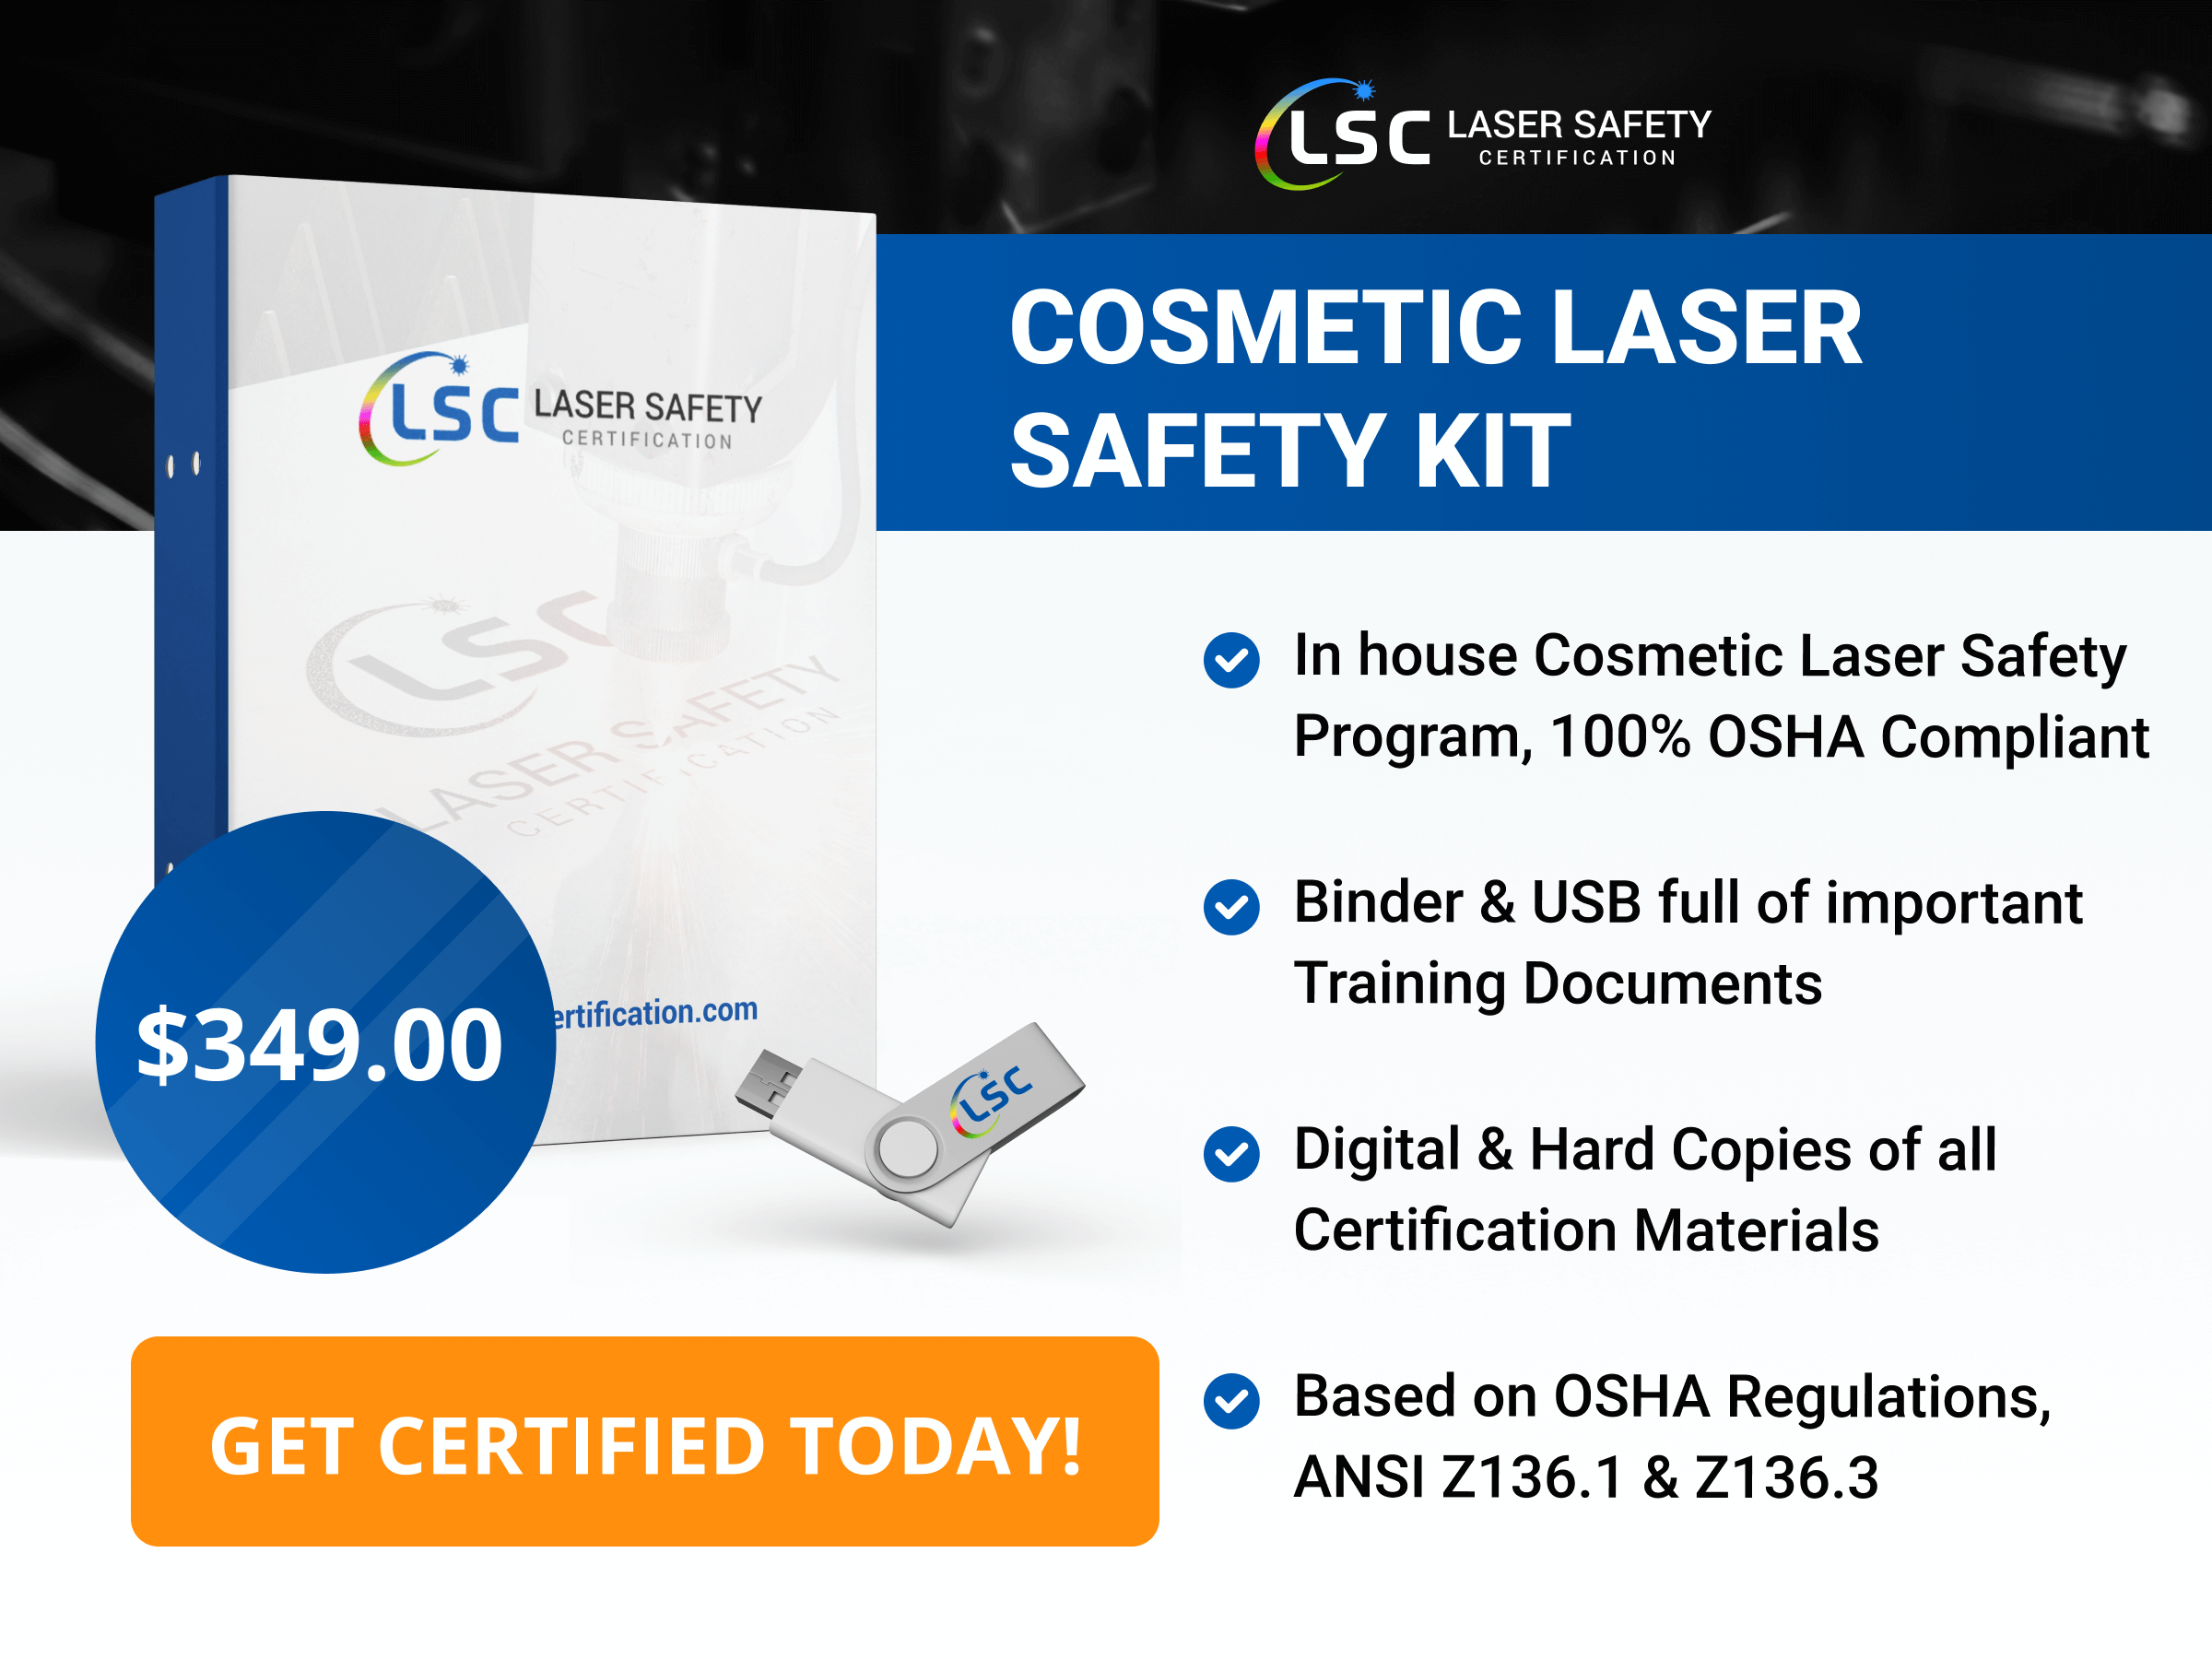 Cosmetic laser safety kit.